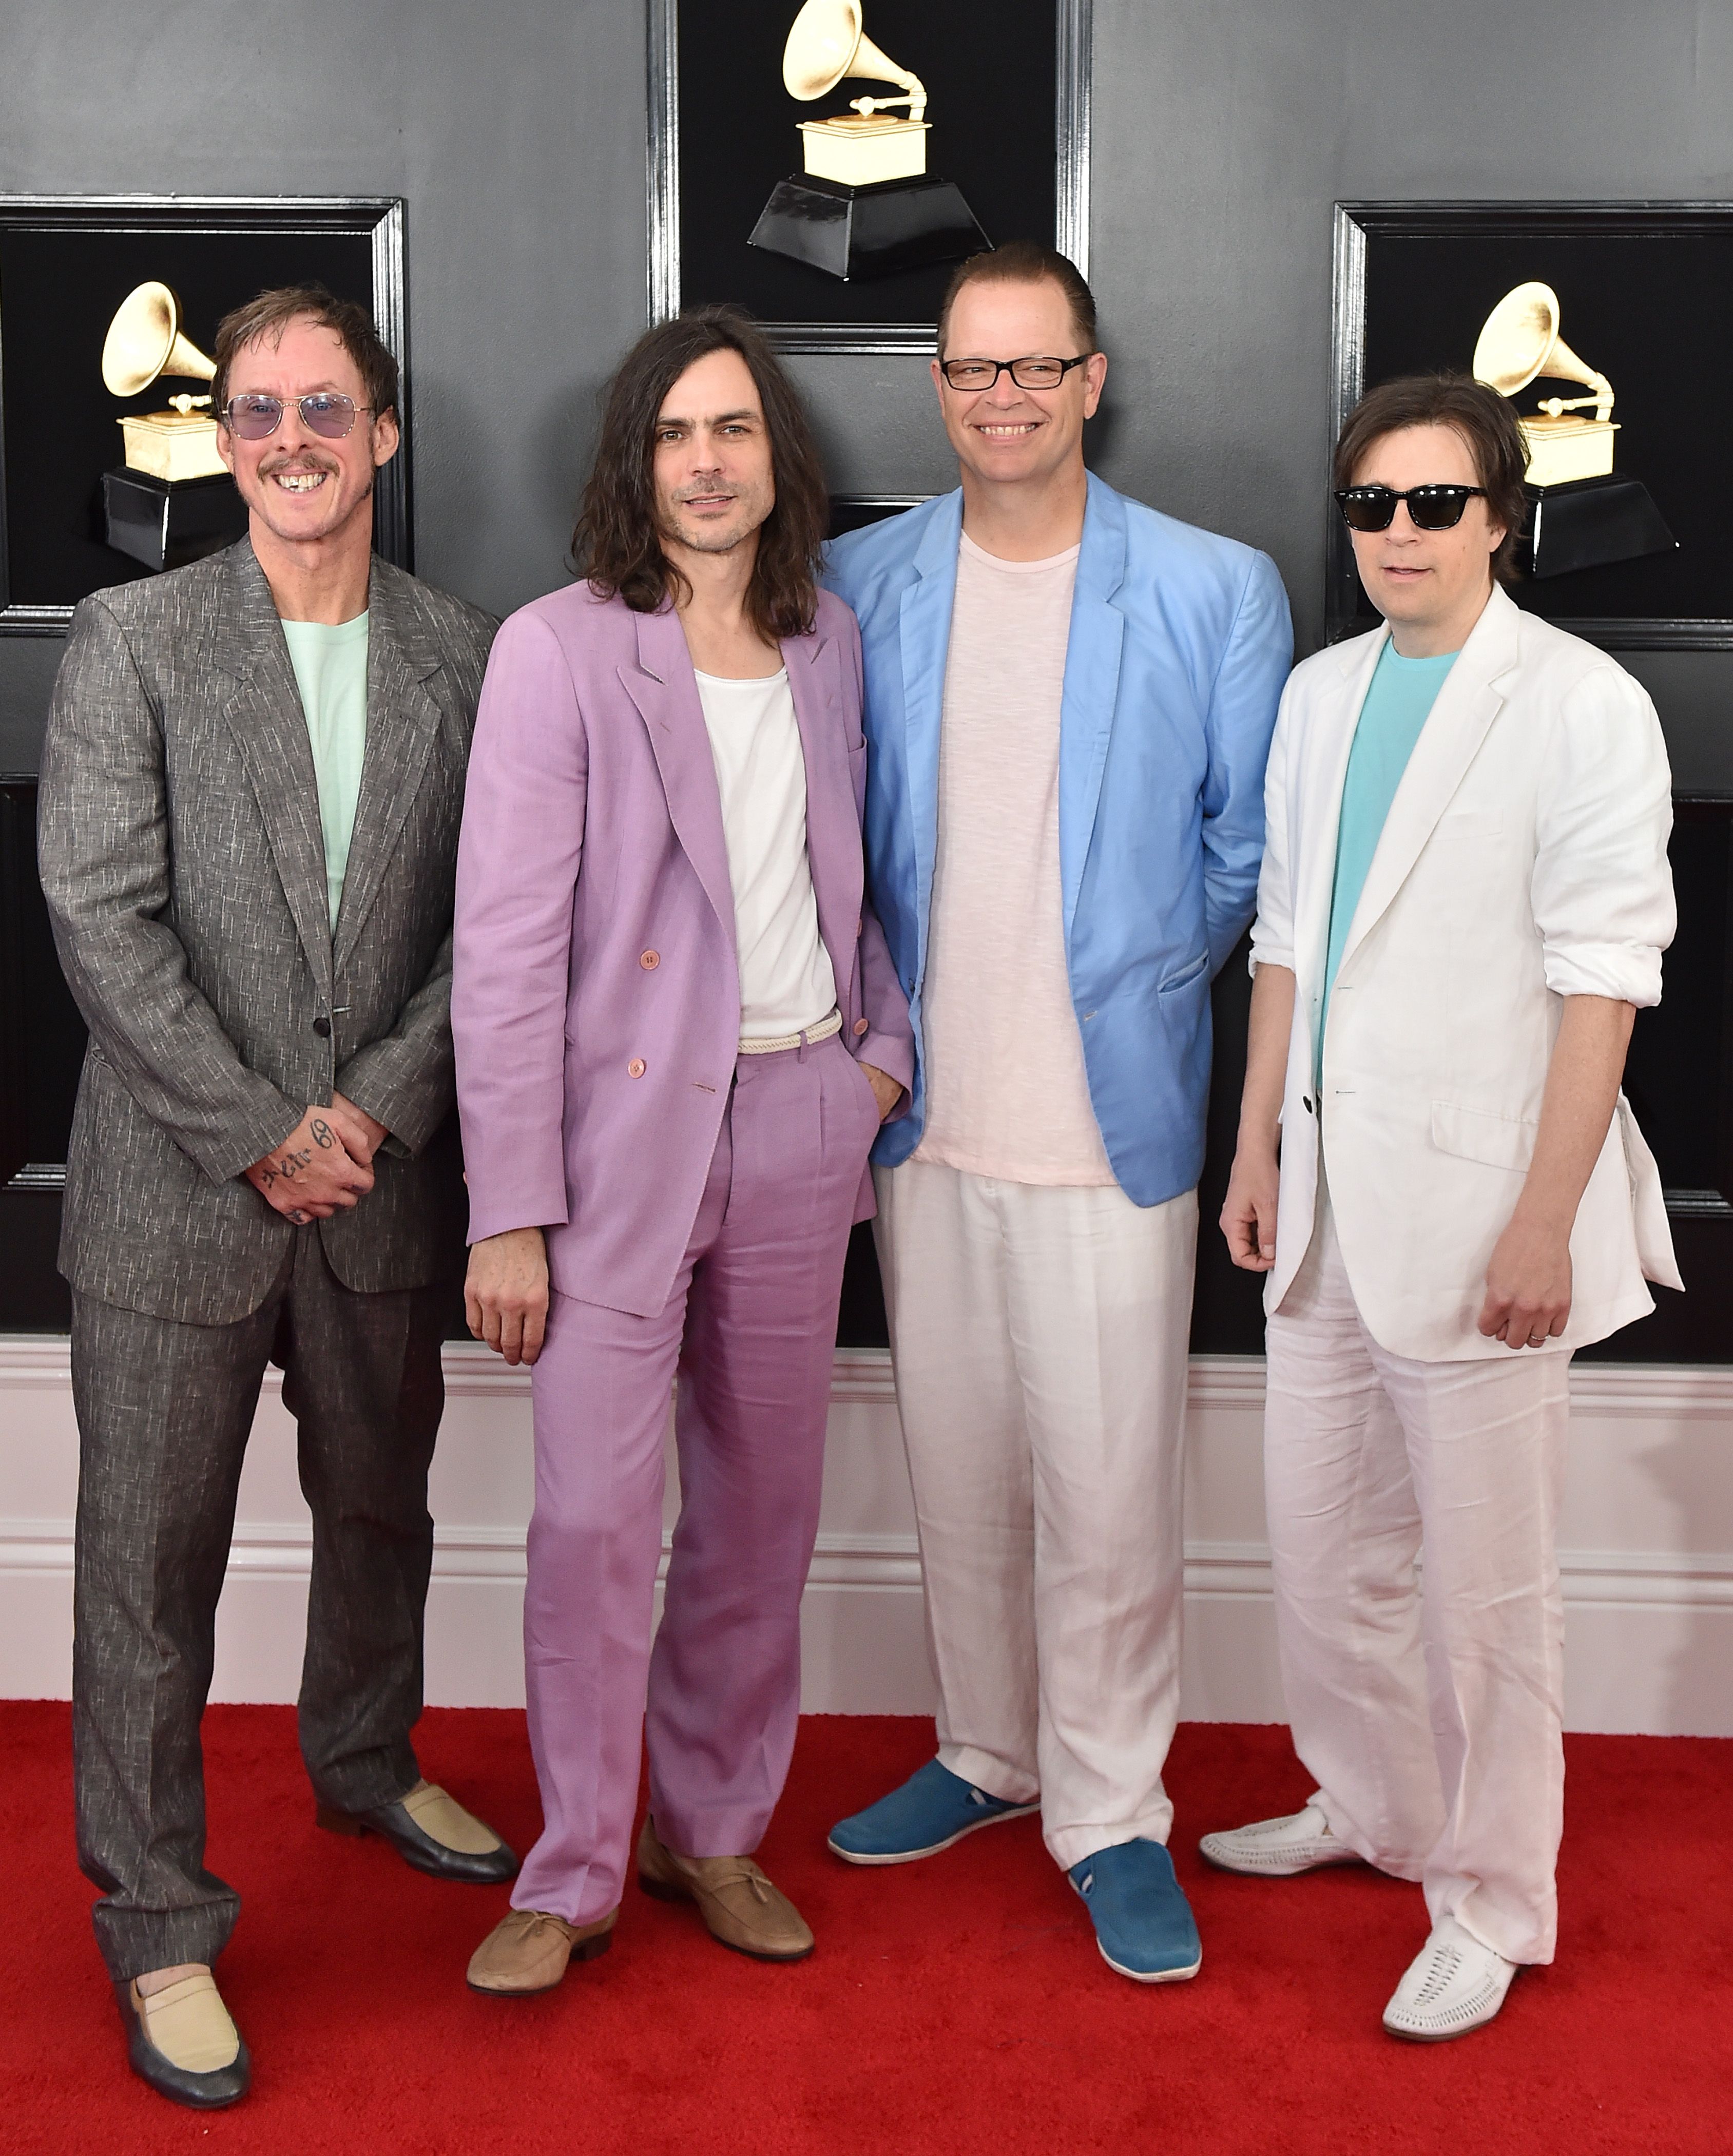 The Weezer Fortnite Debut Is Evidence the Band Needs to Log Off